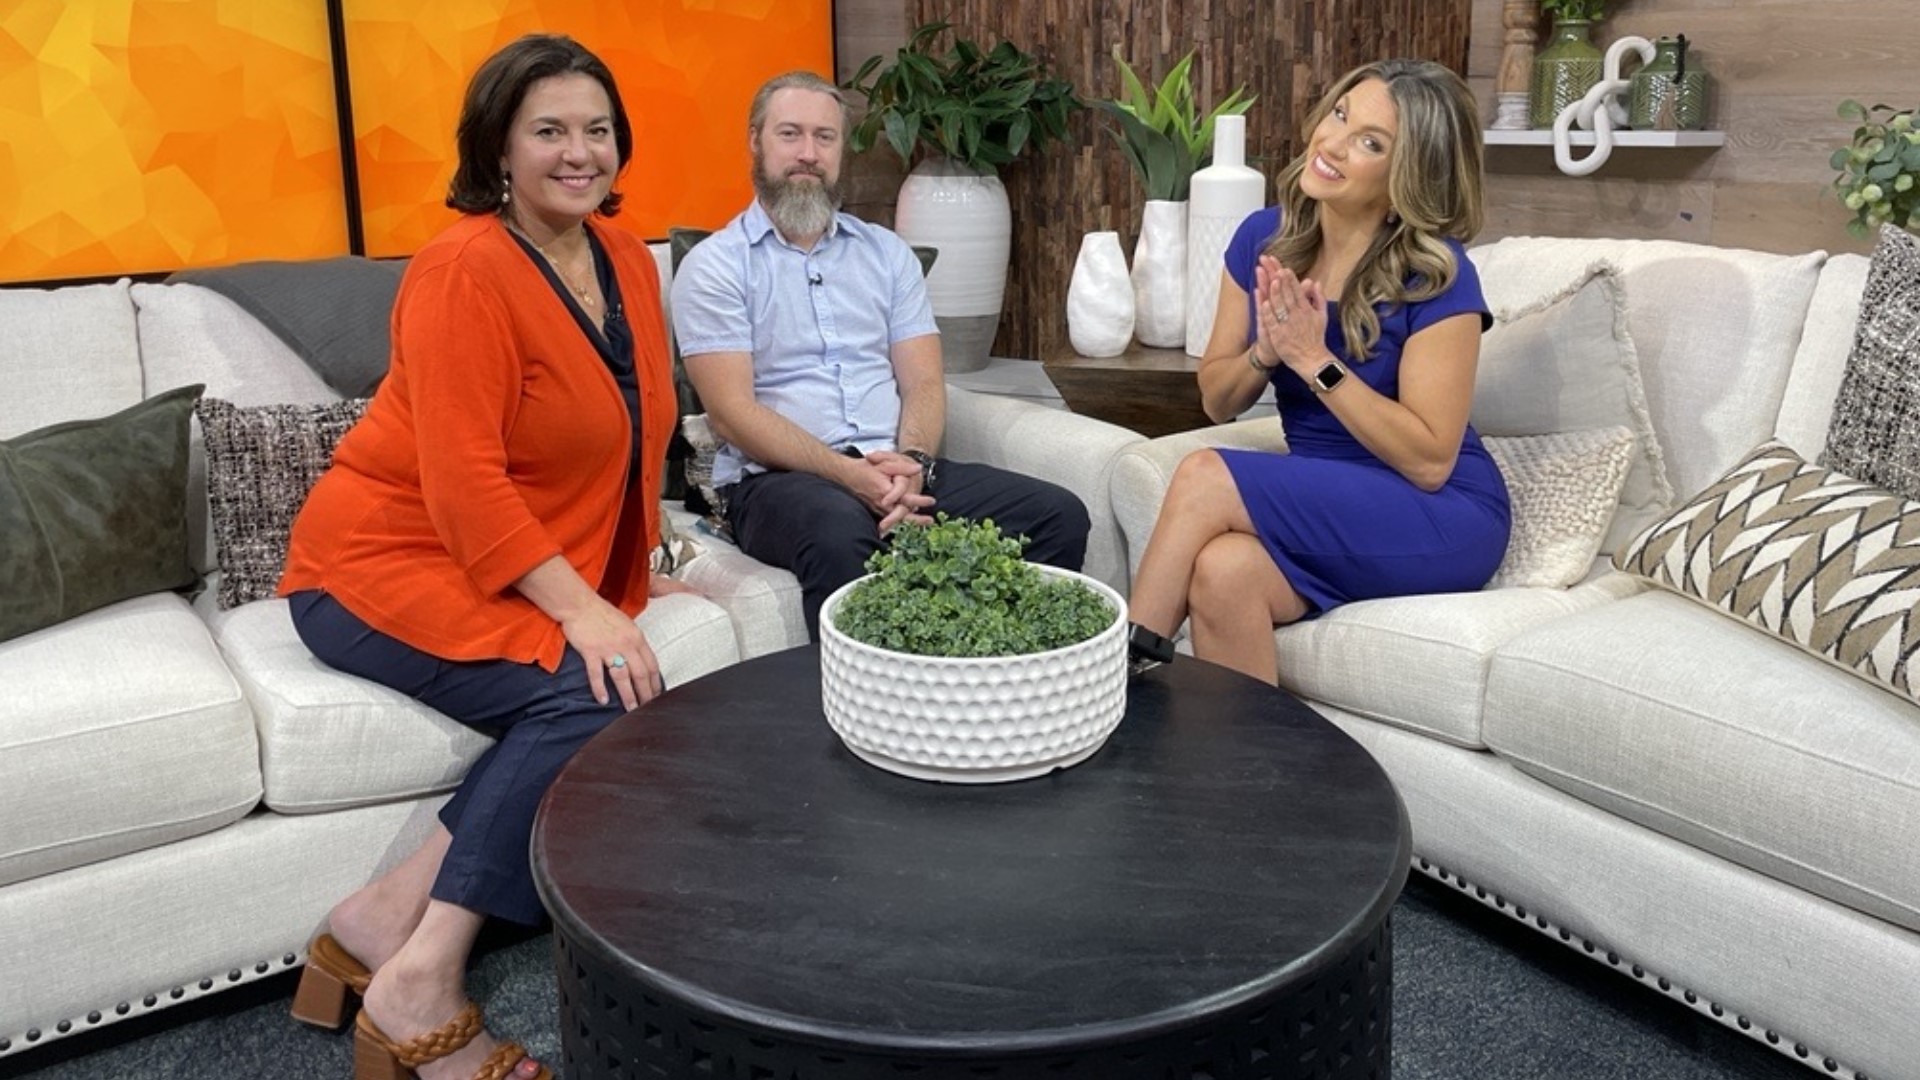 Producer Suzie Wiley and production specialist Derek Price joined Amity to talk about the little ones on the way in their families. #newdaynw